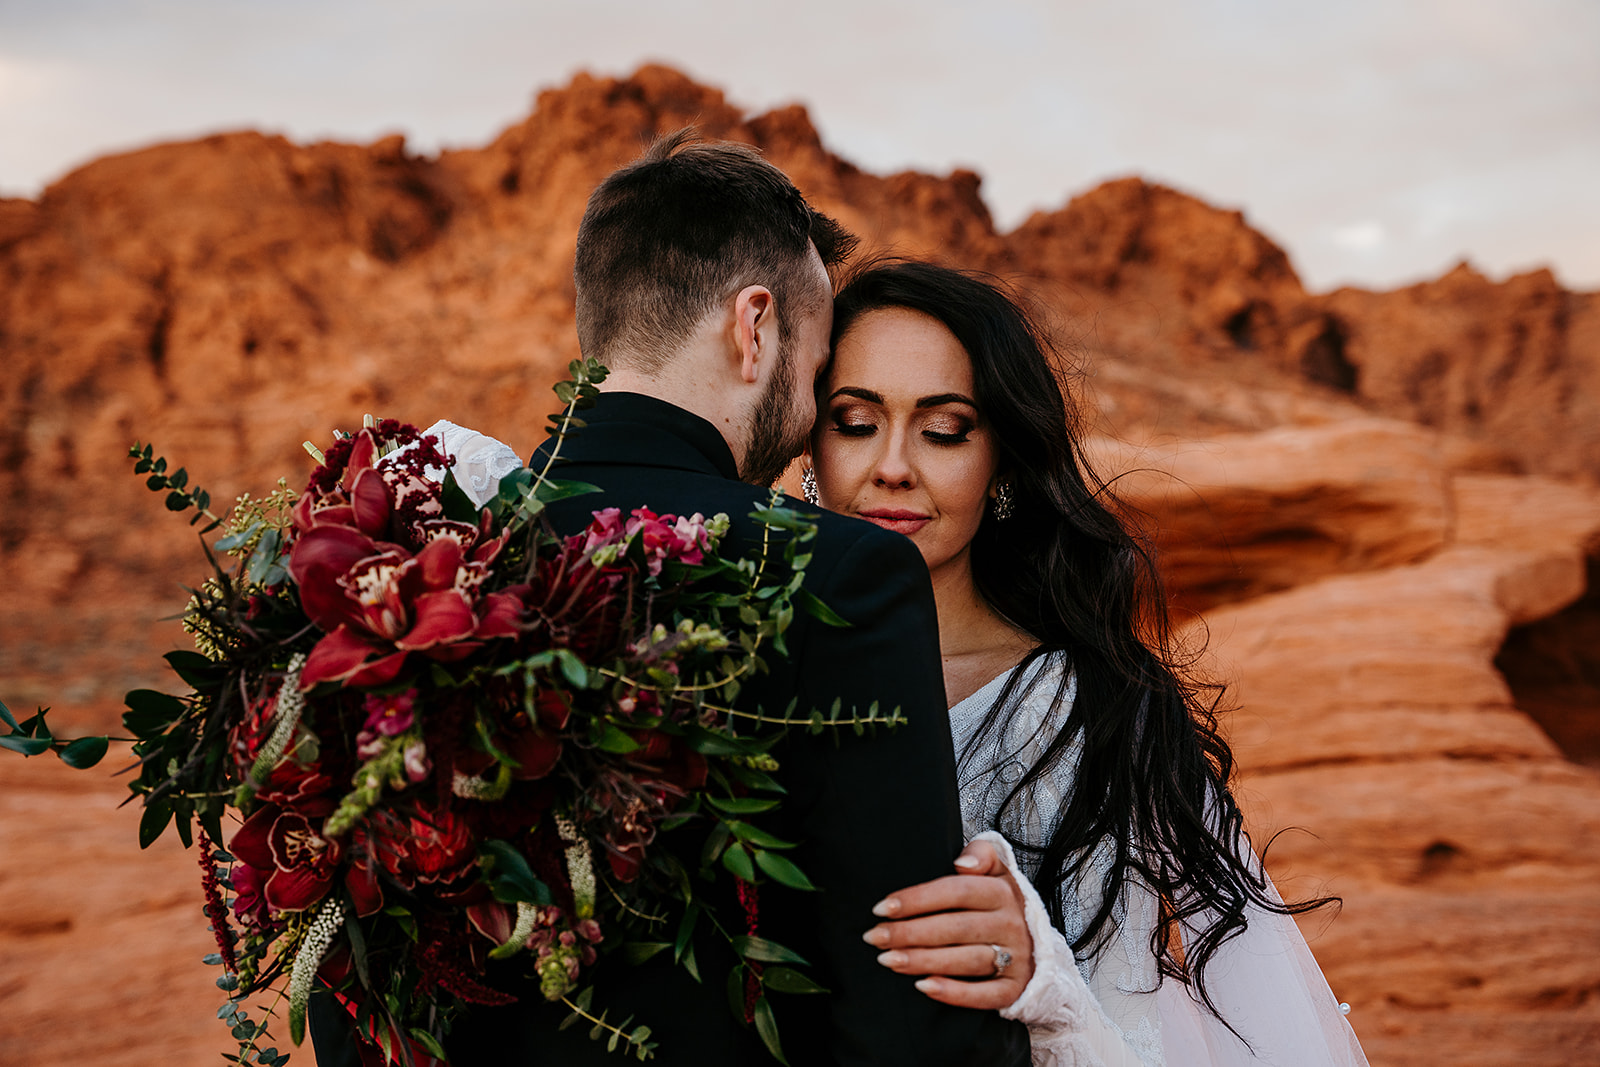 Valley of Fire Weddings - All-Inclusive Elopement Packages. Couple sharing an embrace during their Valley of Fire wedding shoot.